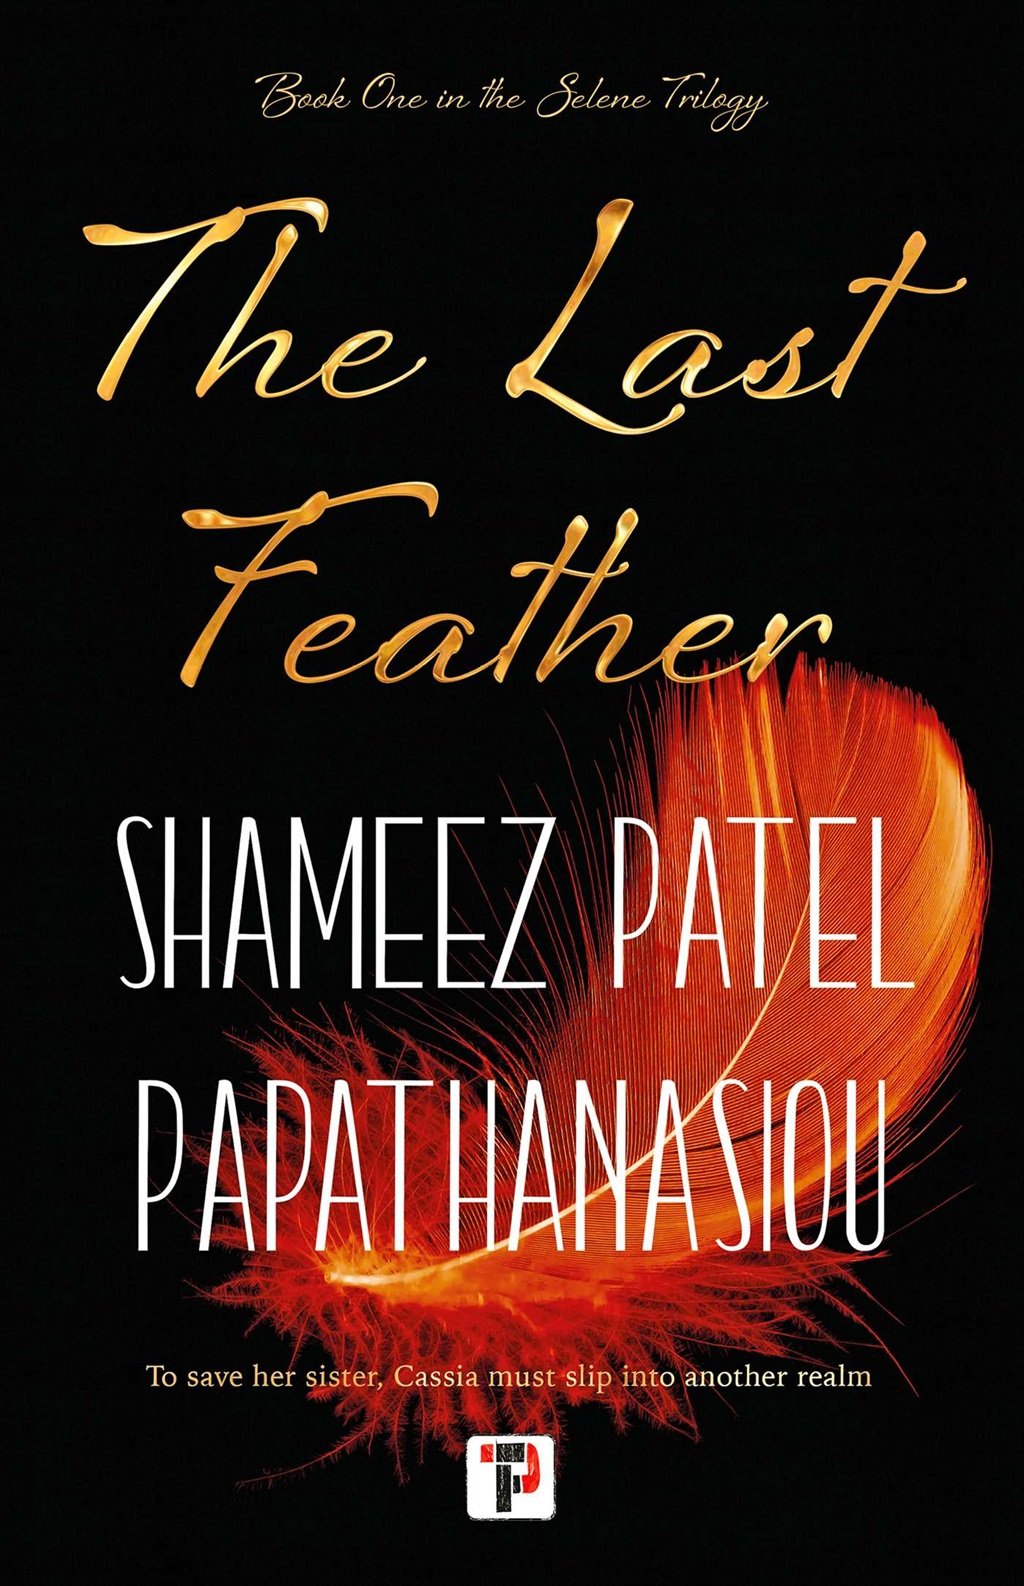 The Last Feather by Shameez Patel Papathanasiou. (Flame Tree Press)